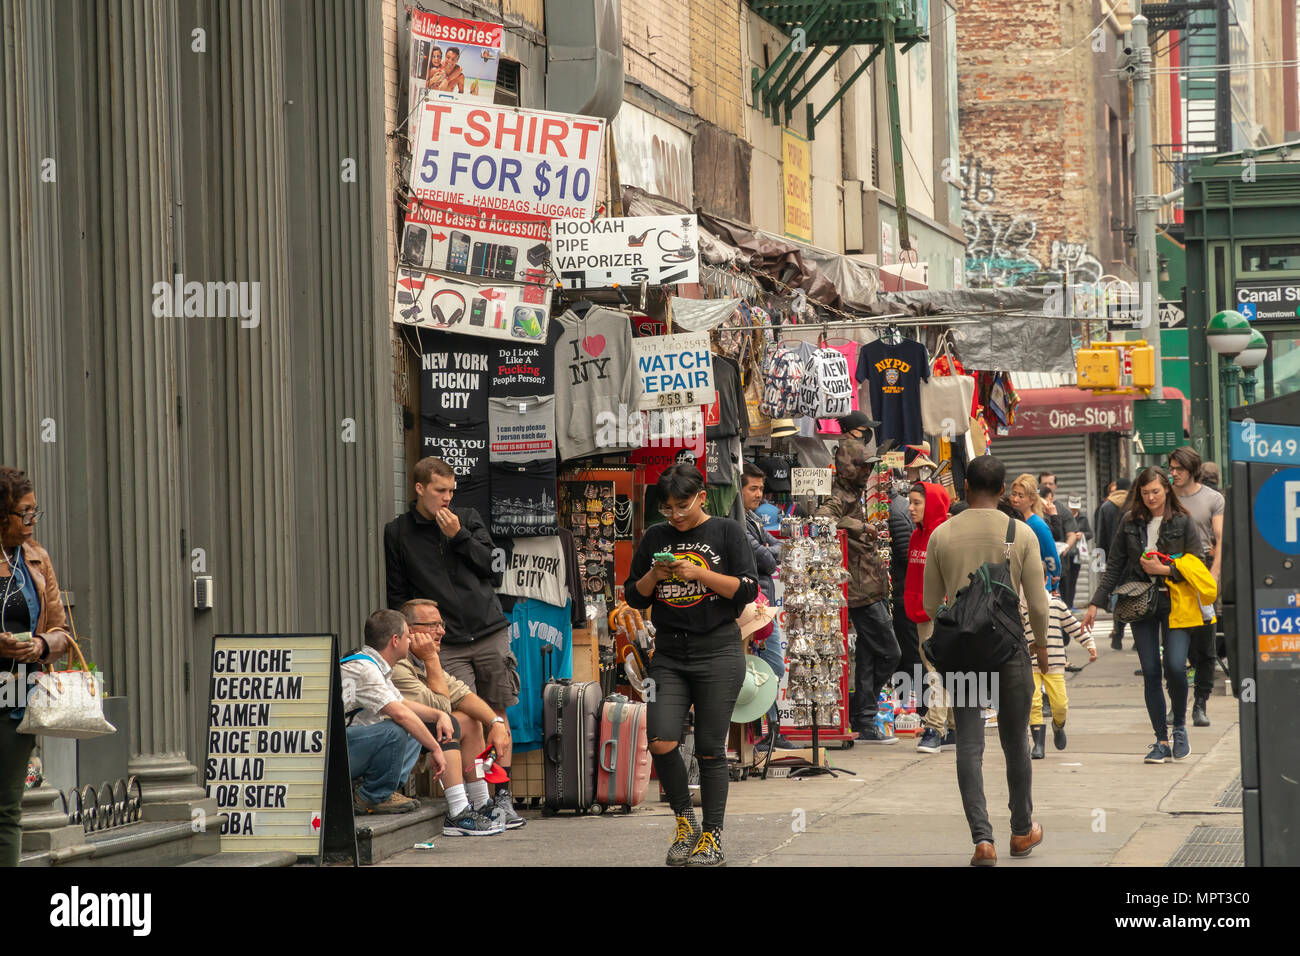 Merchants on Canal Street in New York on Thursday, May 17, 2018. Despite  the ubiquitous merchants selling schlock and counterfeit products the area  around Canal Street is reported to be undergoing a